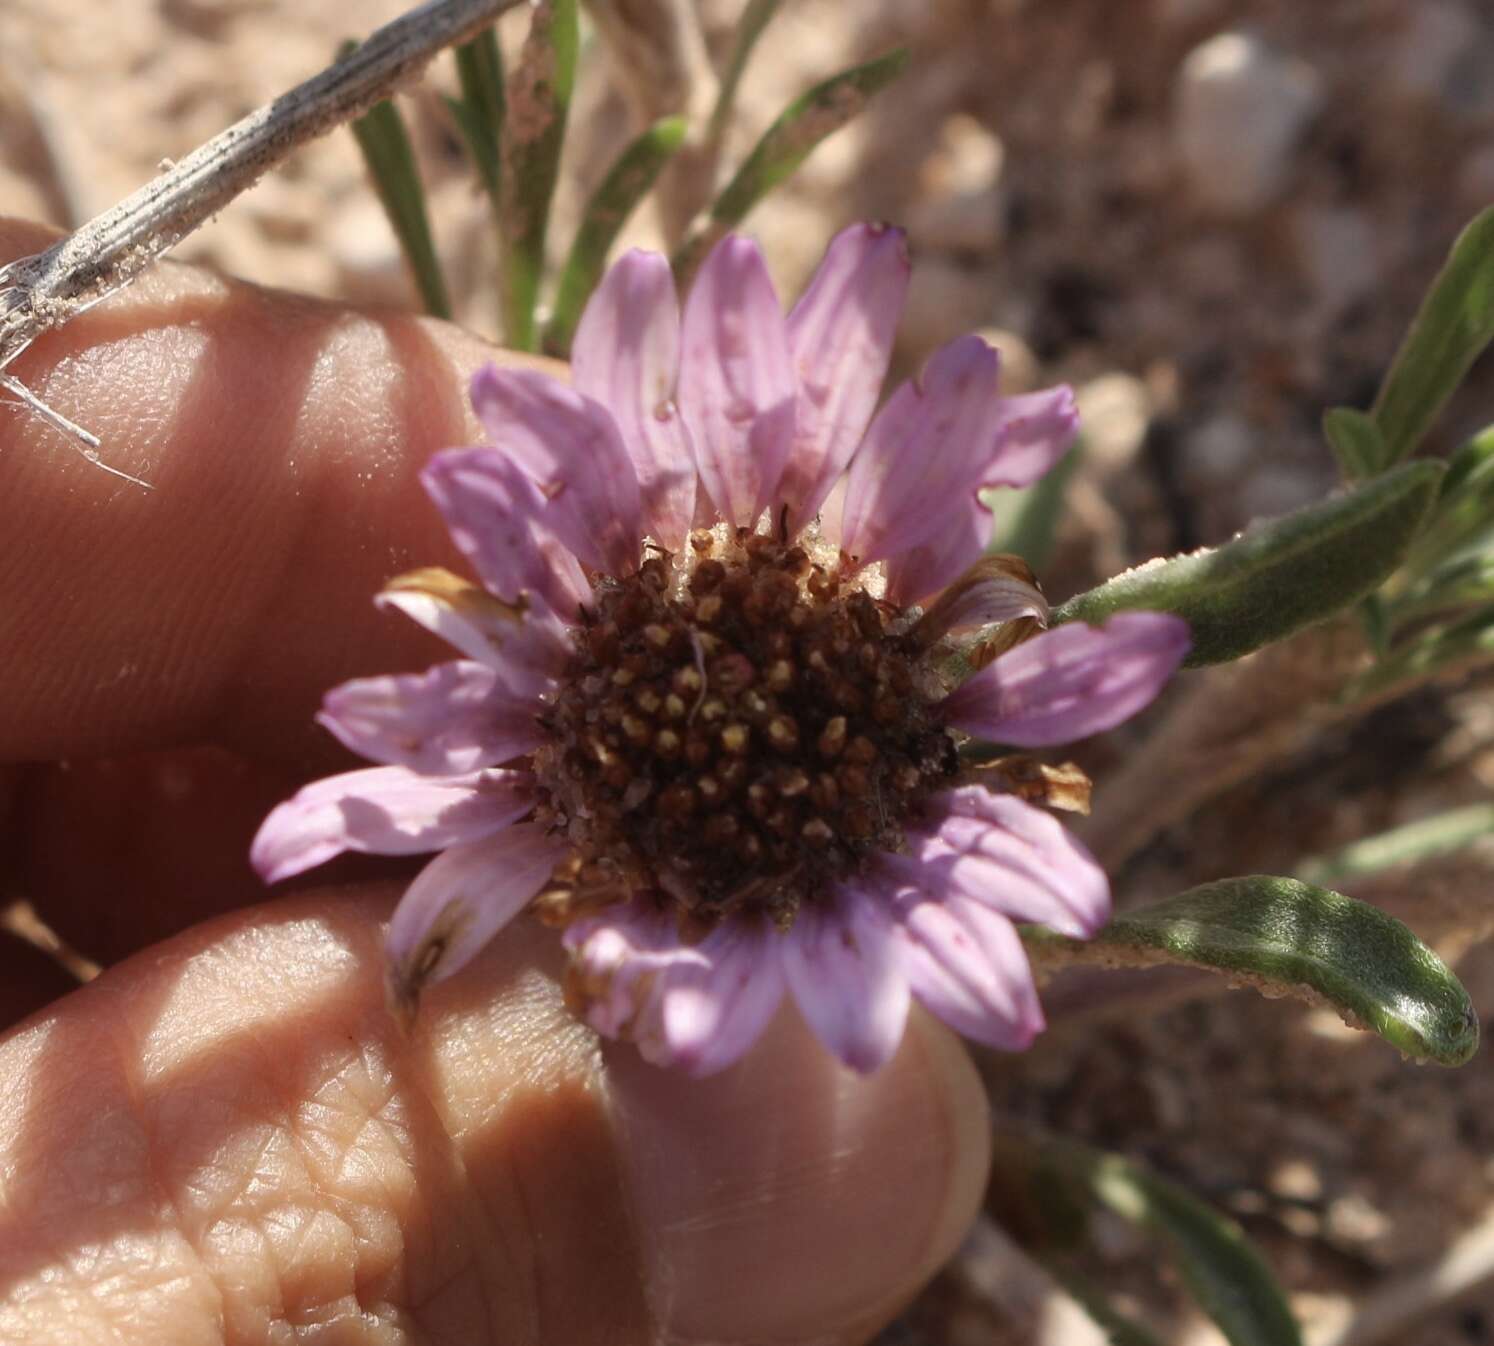 Image of Texas Townsend daisy